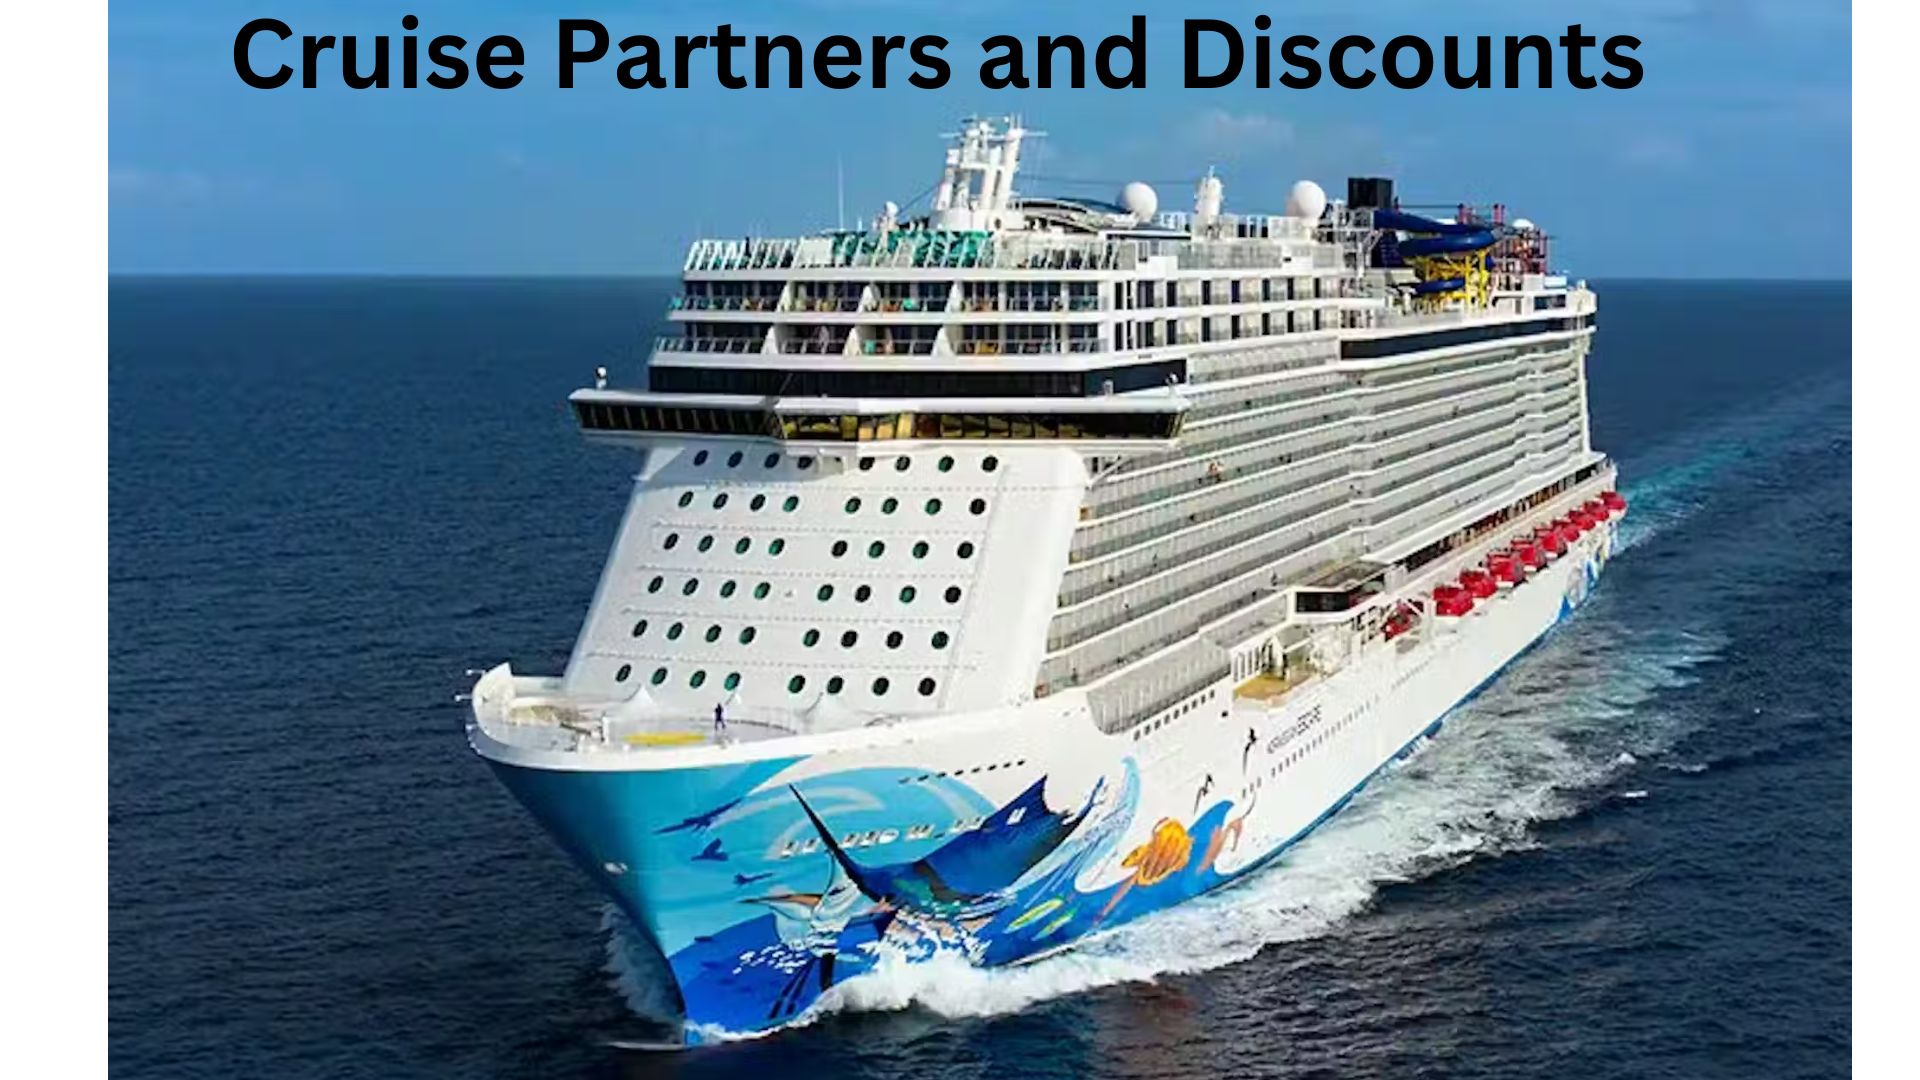 Cruise Partners and Discounts